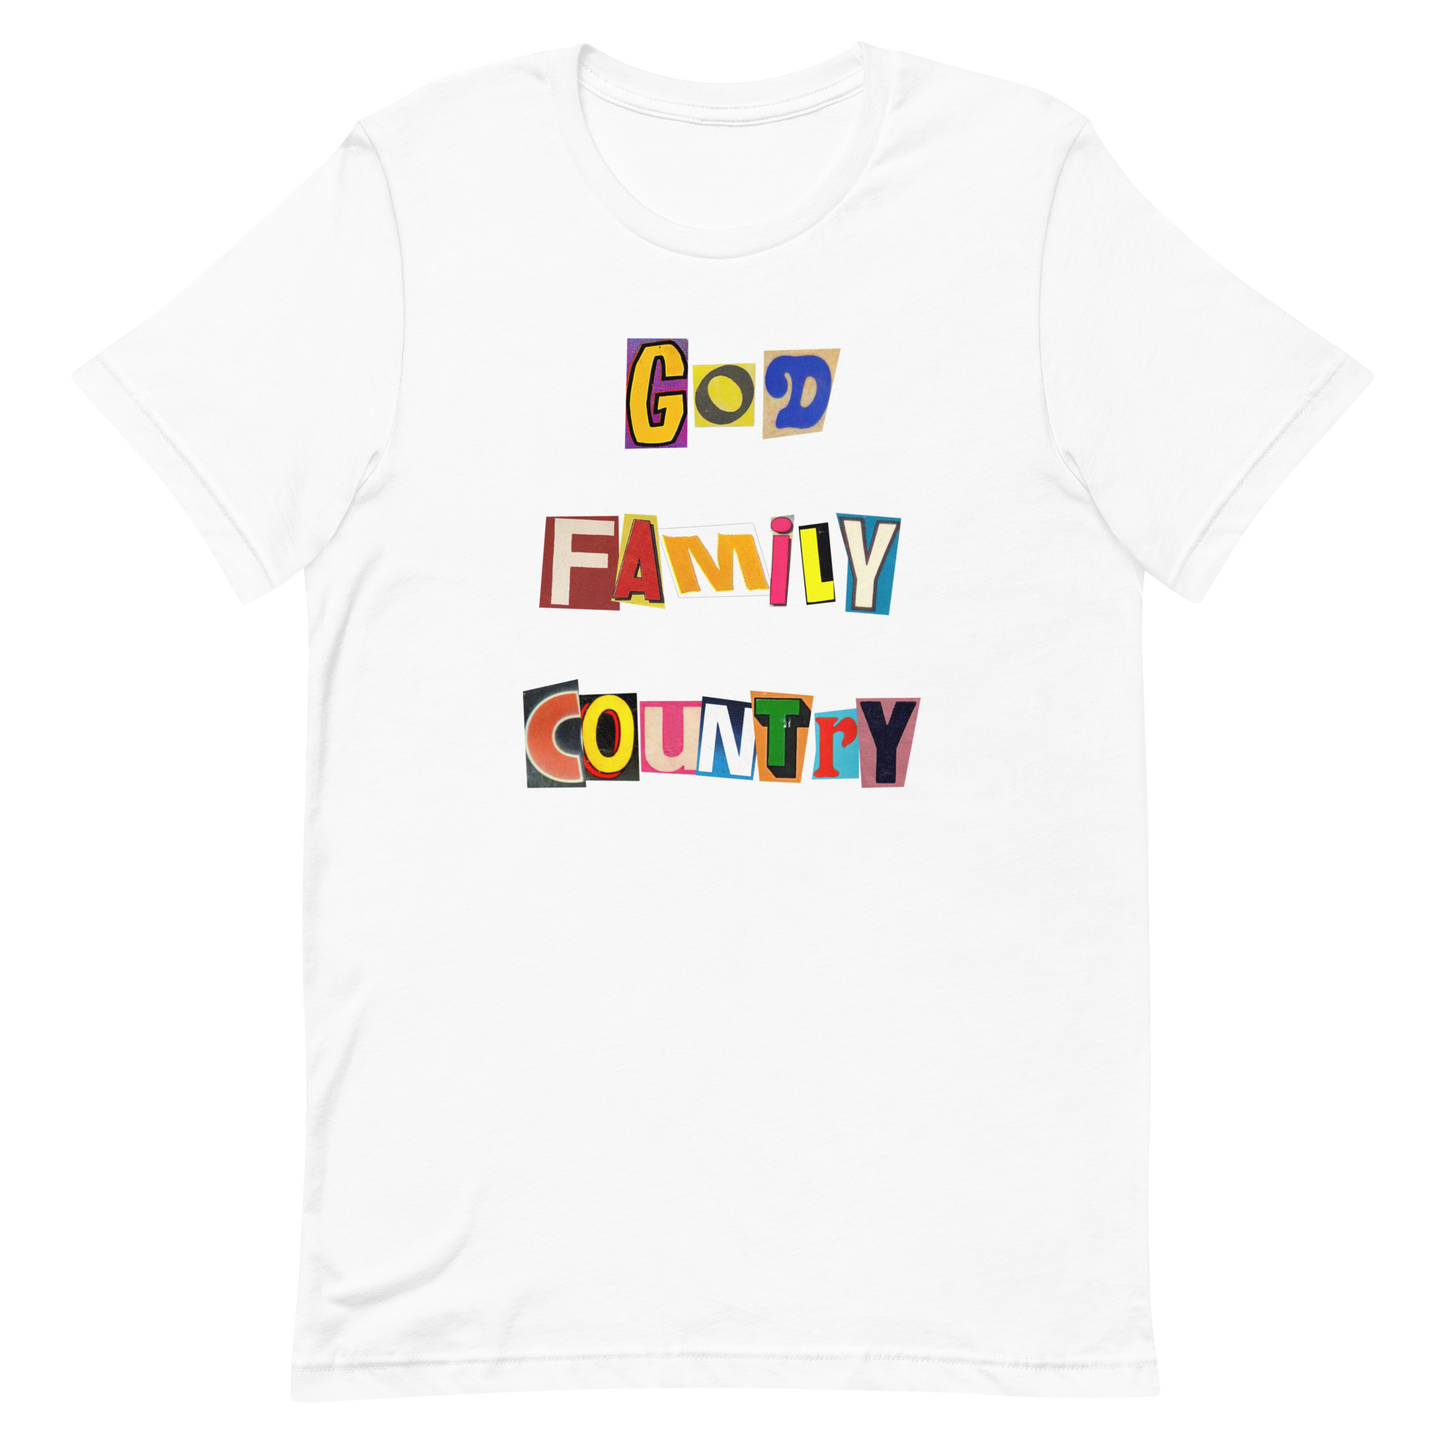 God Family Country T-shirt